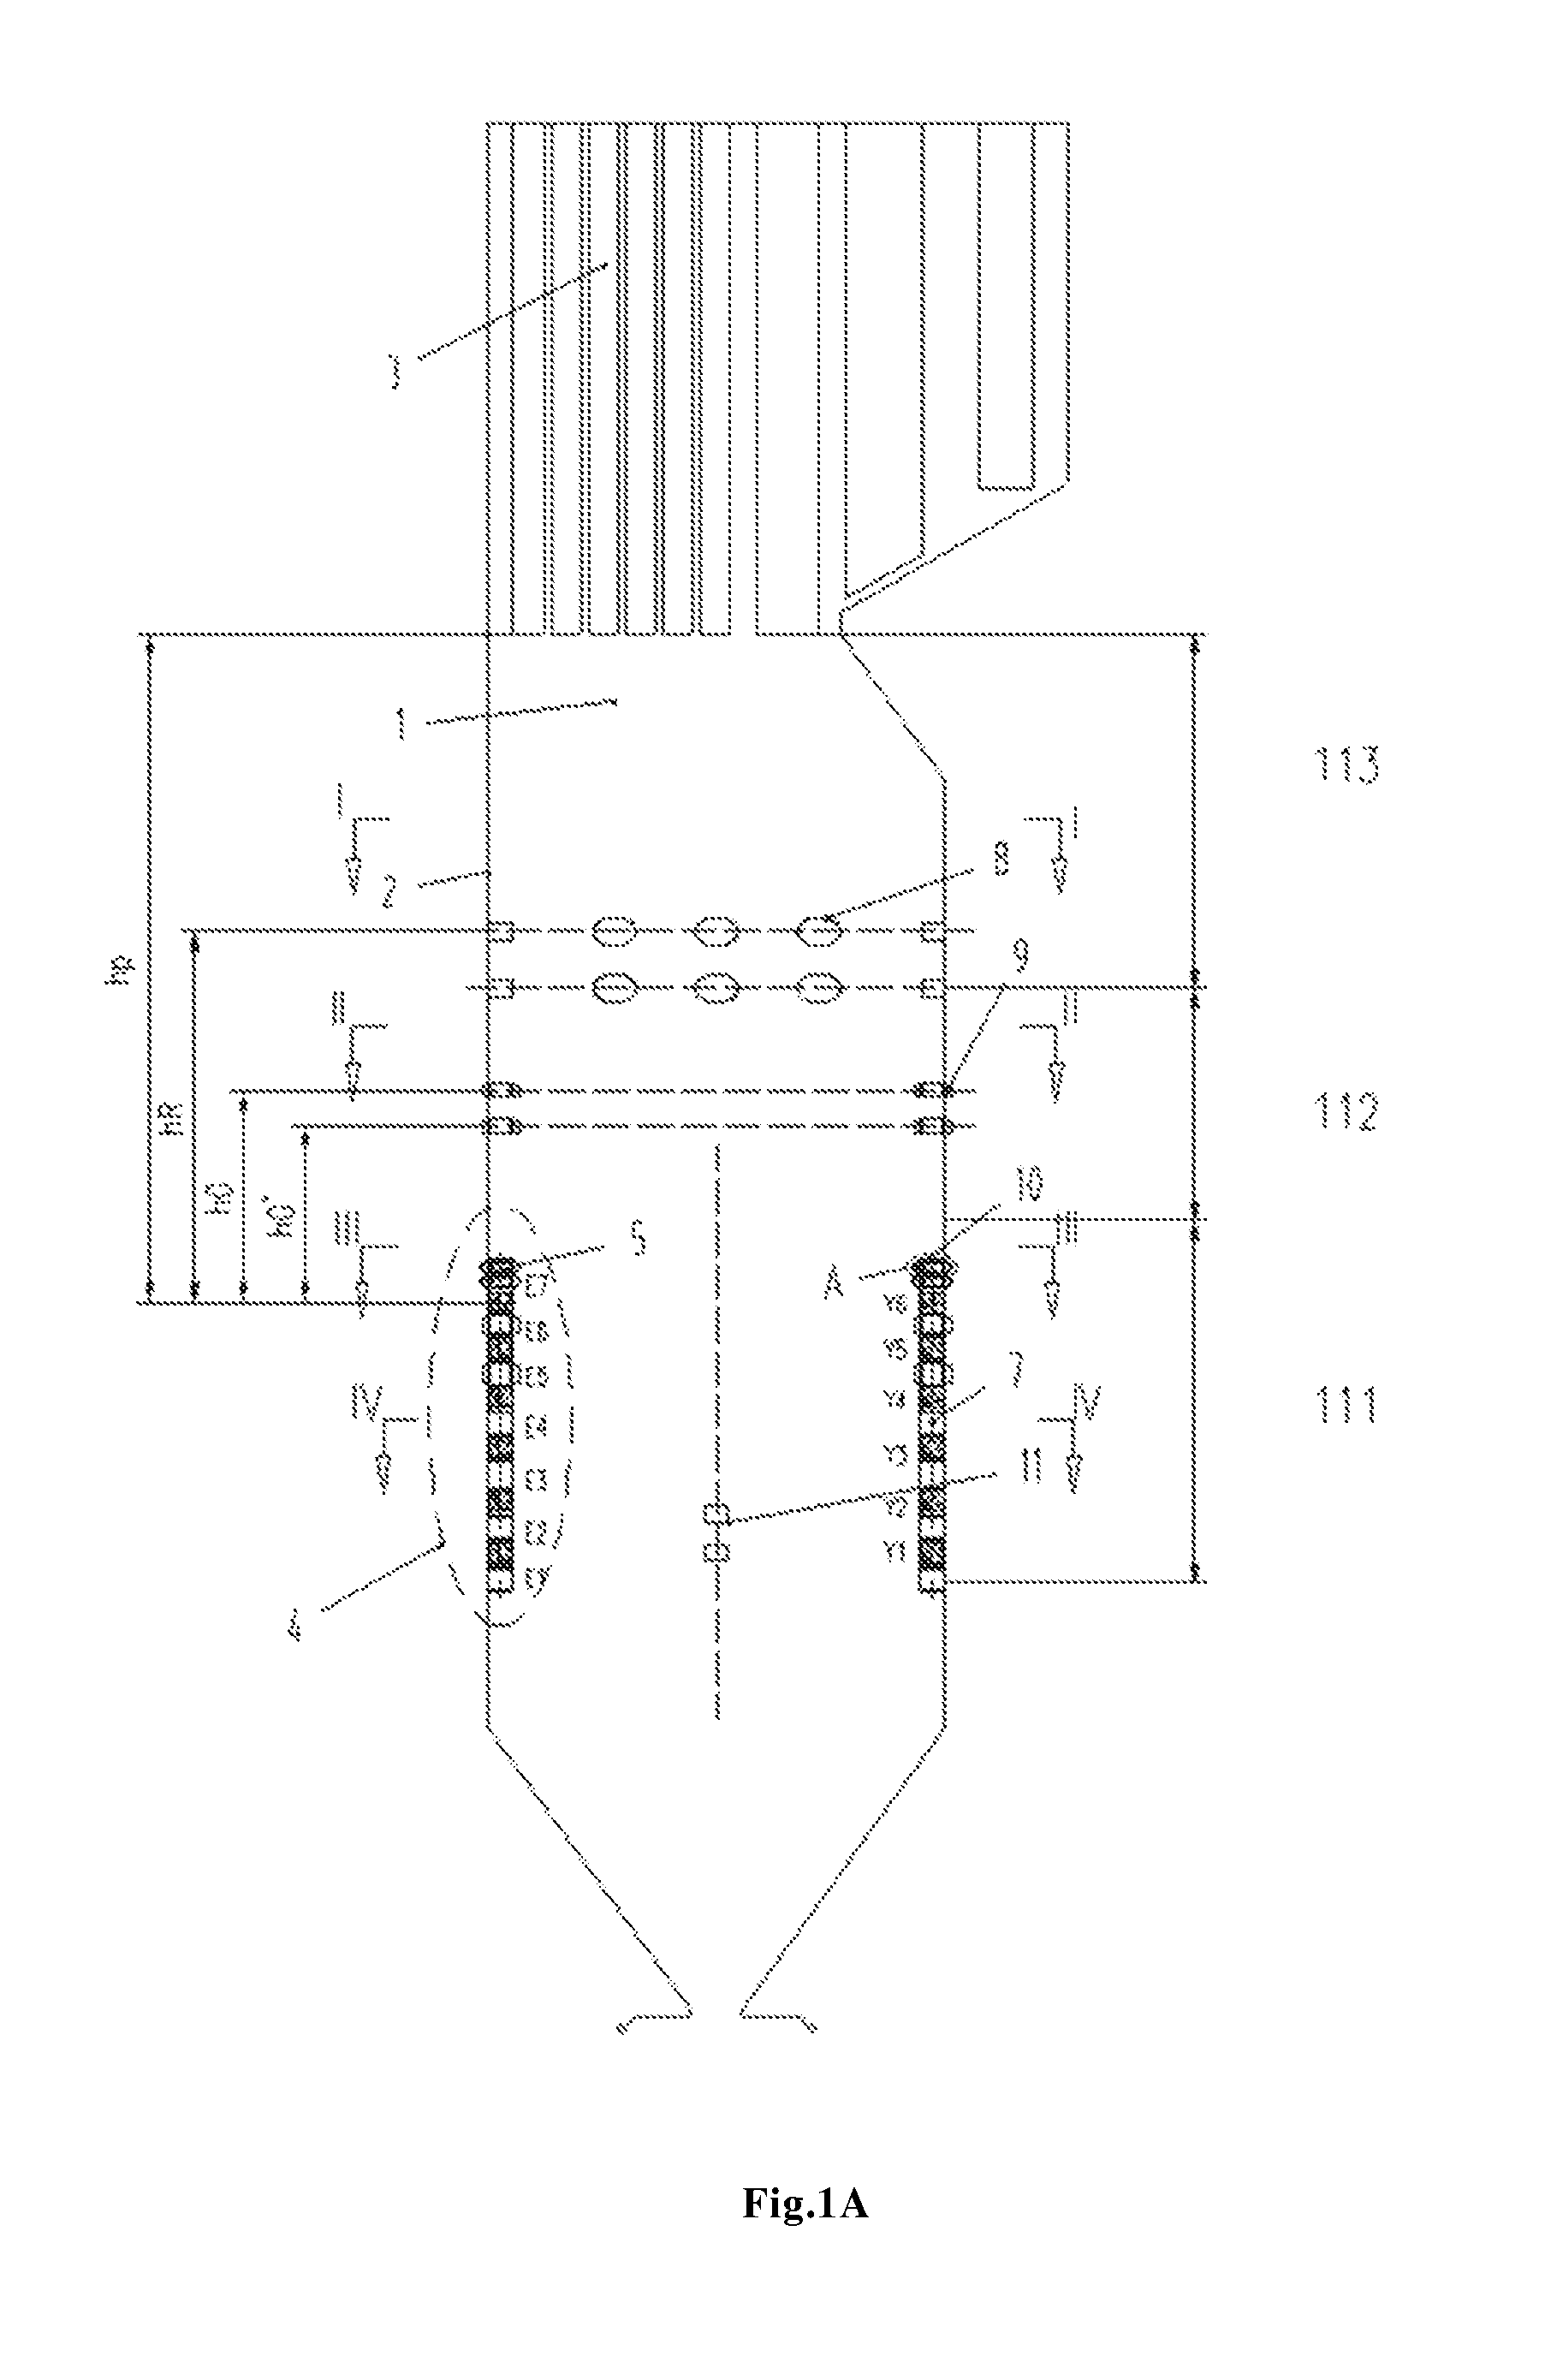 Pulverized coal fired boiler with wall-attachment secondary air and grid overfire air